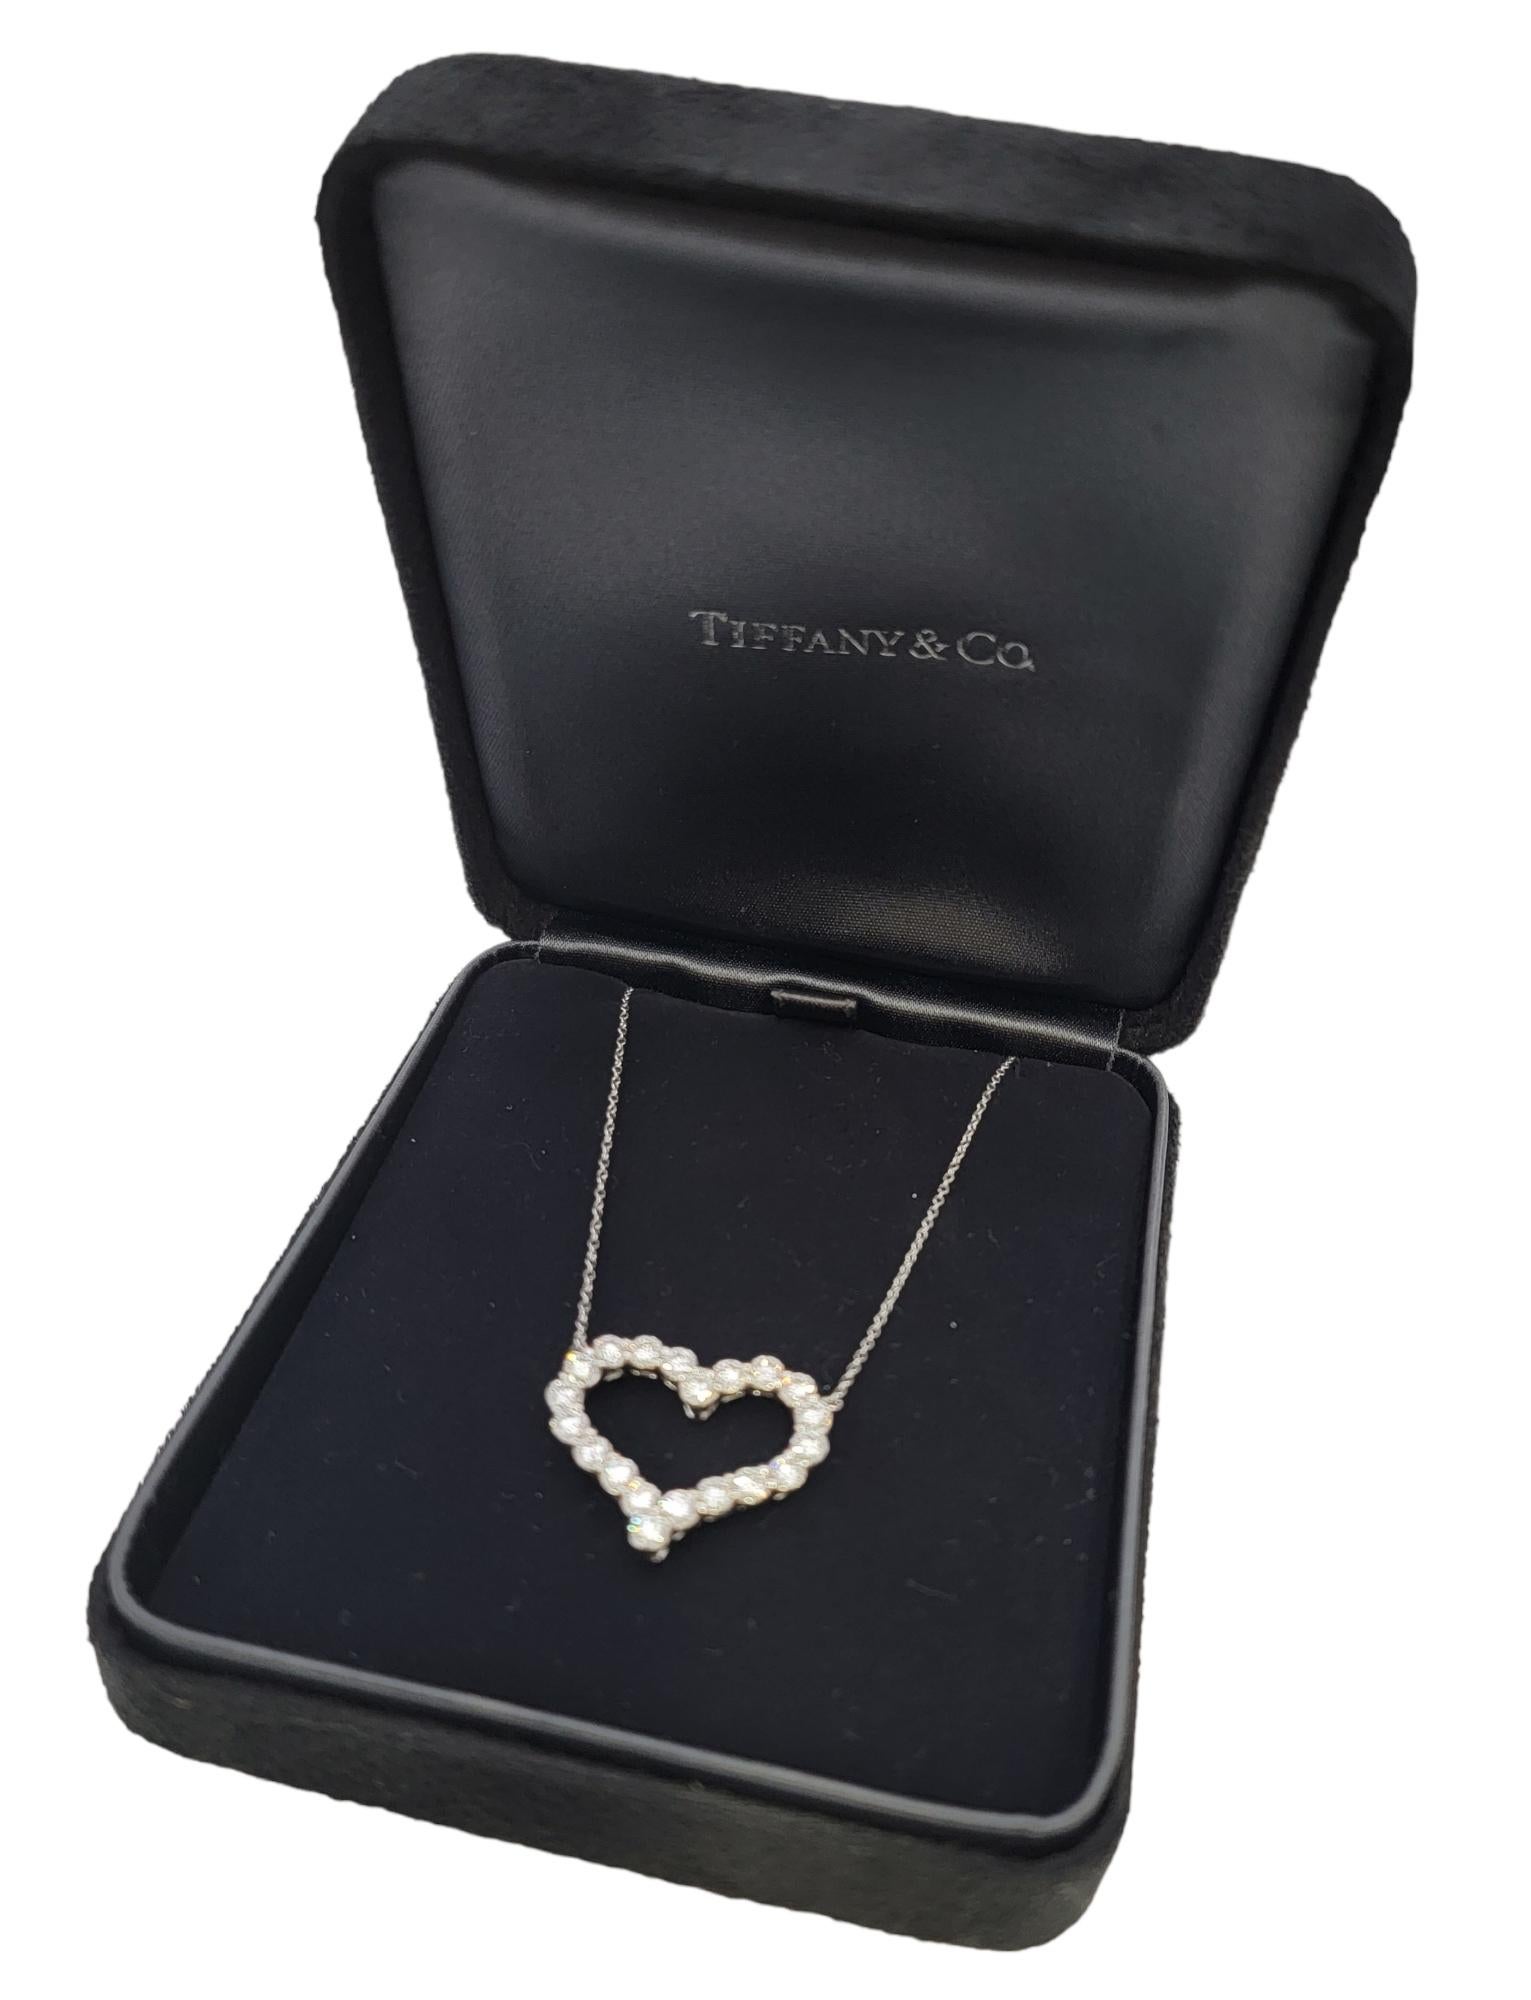 Tiffany & Co. Large Diamond Open Heart Pendant in Platinum on a Necklace 6